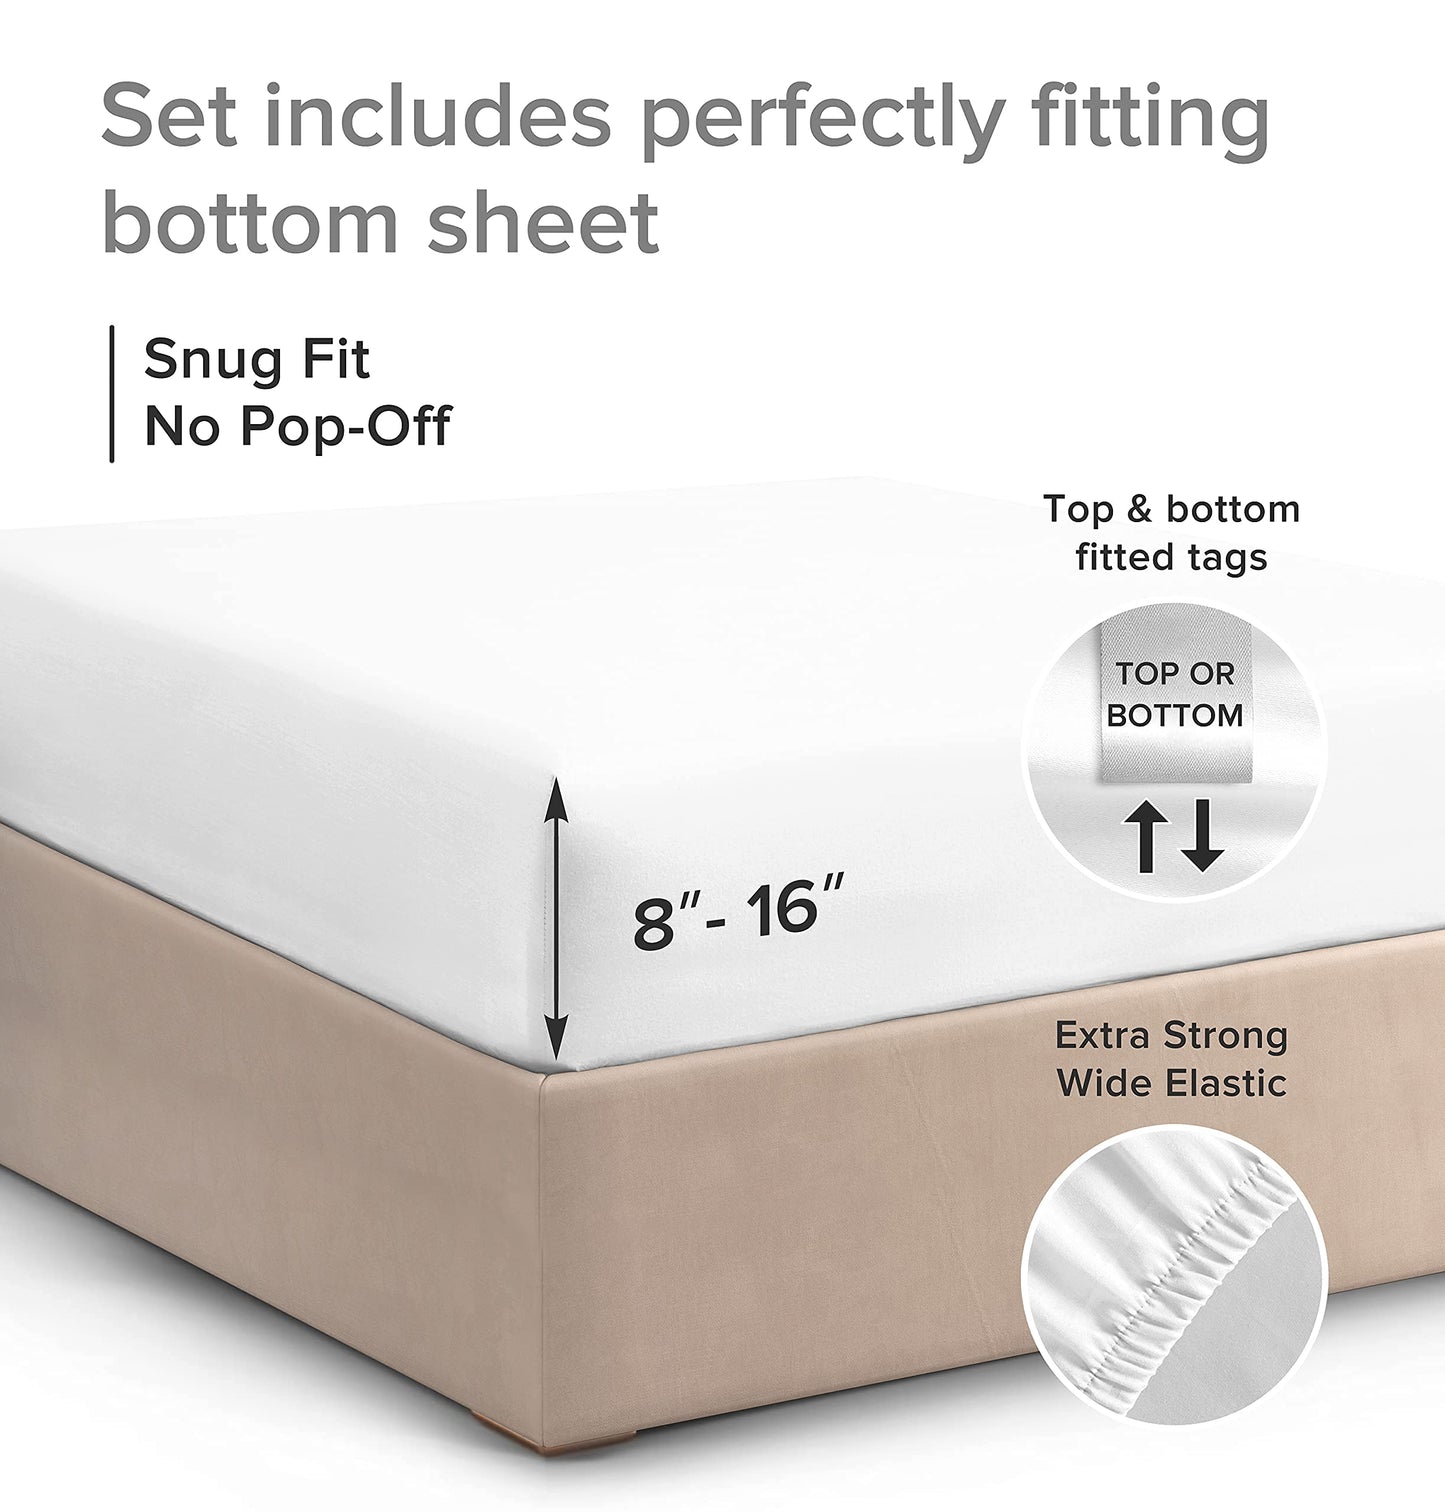 Twin XL Size Fitted Bed Sheet - Hotel Luxury Single Fitted Sheet Only - Fits Mattress Up to 16" - Extra Soft, Wrinkle Free, Breathable Sheet for Women, Men, Kids & Teens - White Single Fitted Sheet